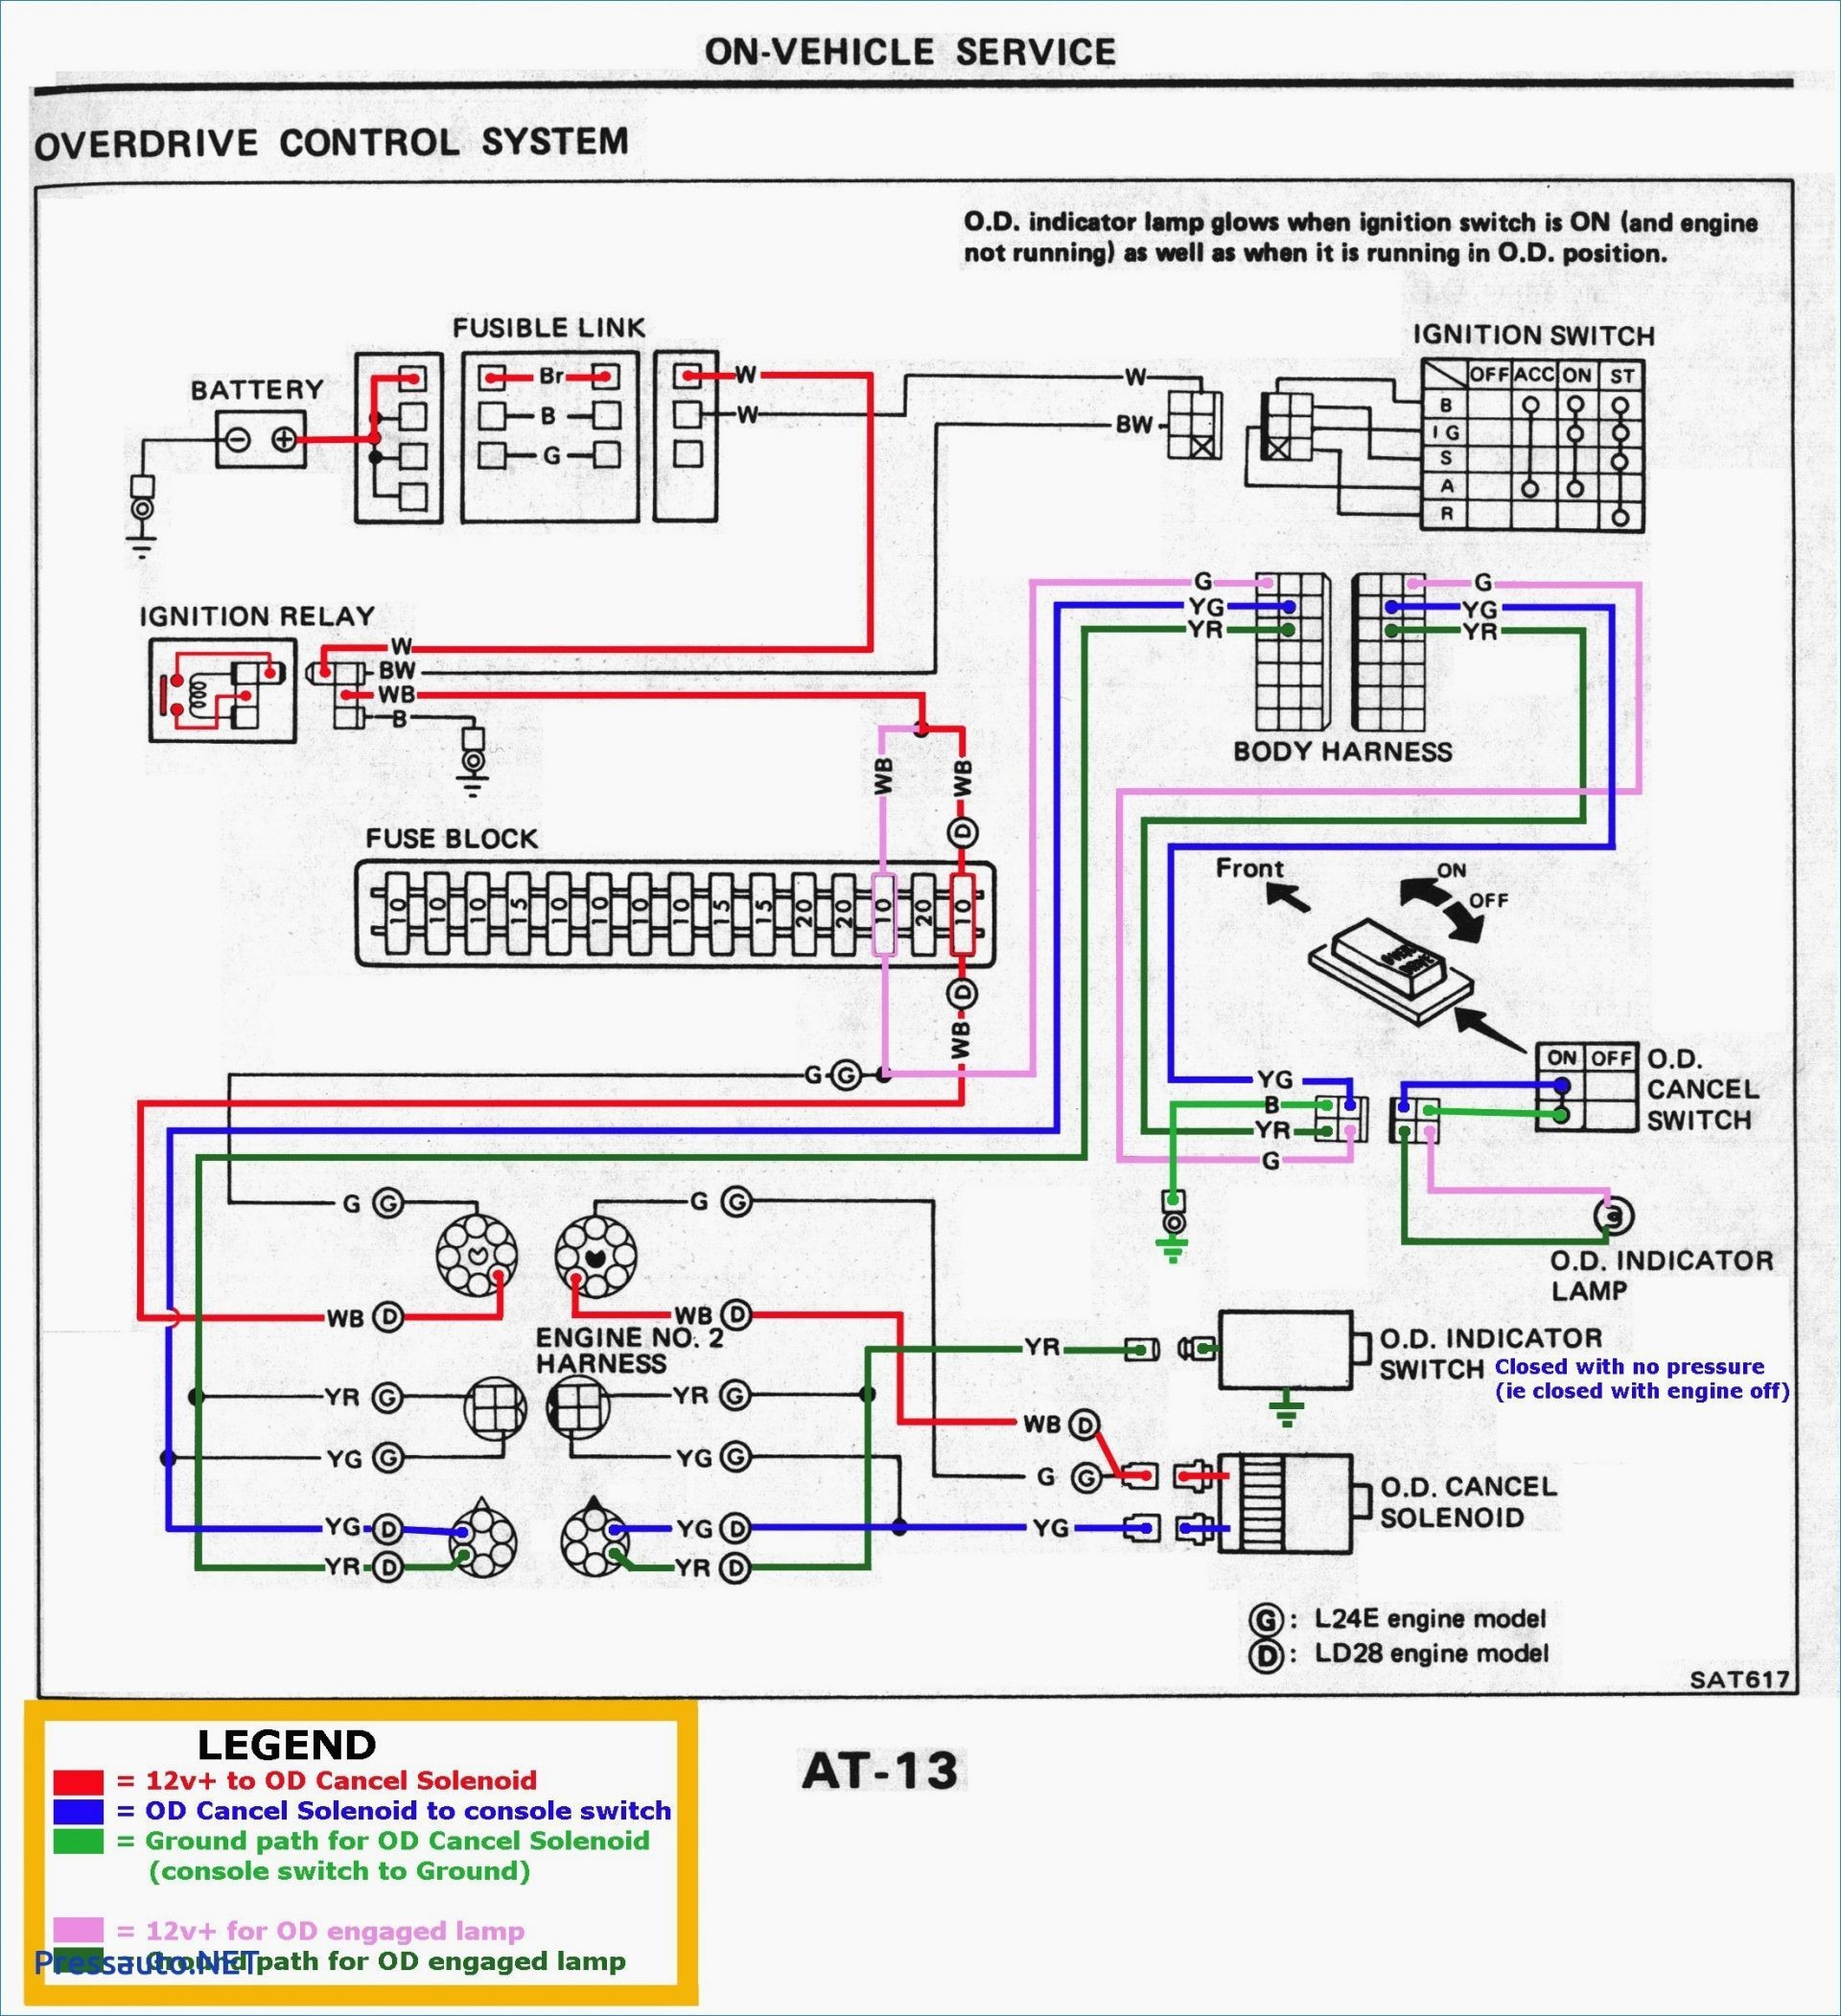 Domestic Electrical Wiring Diagram Symbols Fresh How To Wire A House For Electricity Diagram Fresh House Electrical